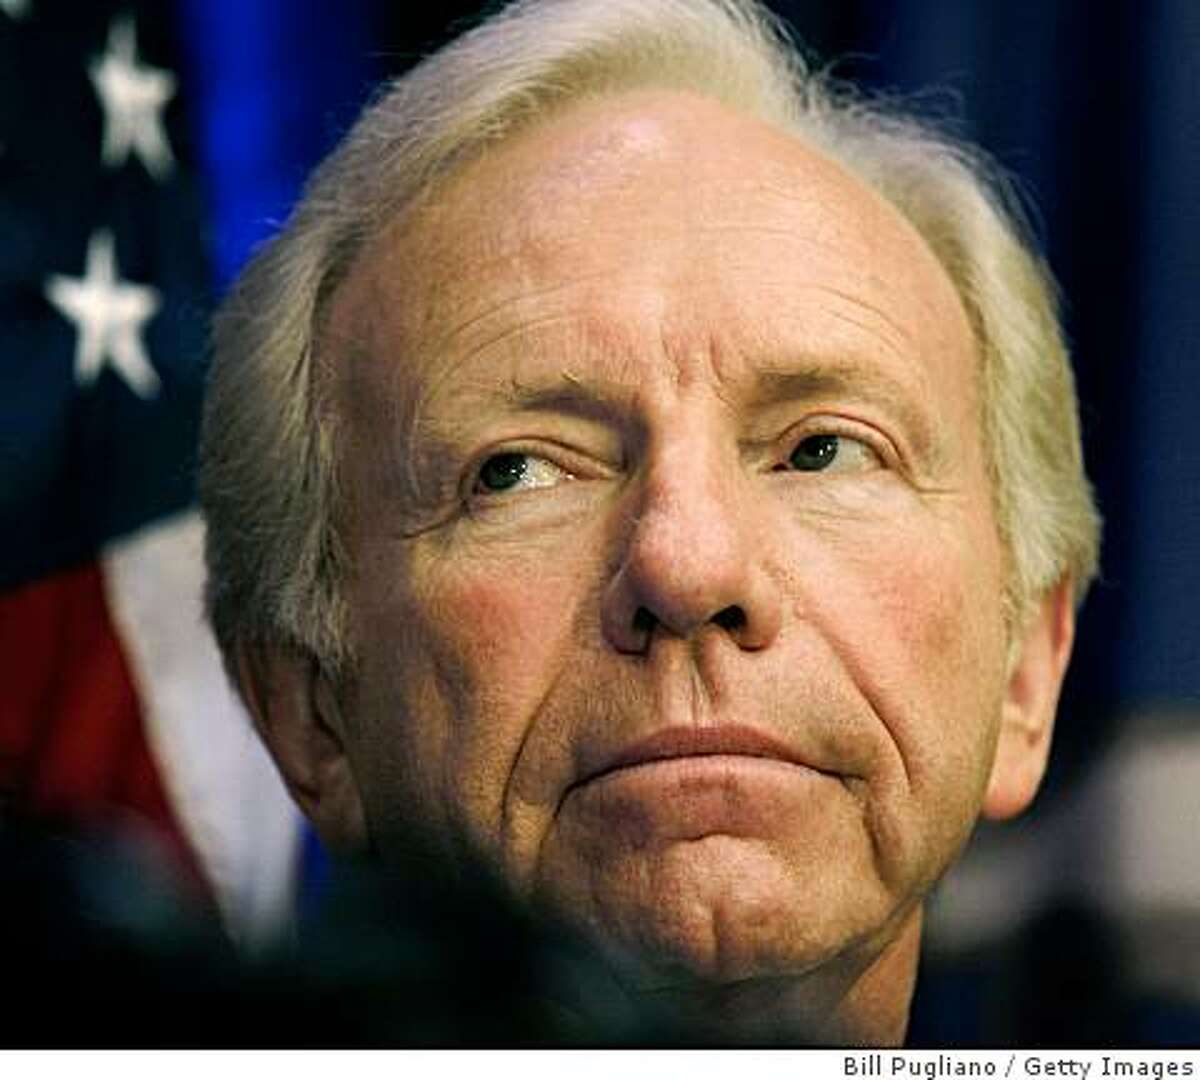 BIRMINGHAM, MI- AUGUST 13: Sen. Joseph Lieberman (I-CT) listens as presumptive republican presidential nominee, U.S. Senator John McCain (R-AZ) speaks with the news media at a press conference August 13, 2008 in Birmingham, Michigan. McCain was in Michigan for fund-raising and campaign events. (Photo by Bill Pugliano/Getty Images)